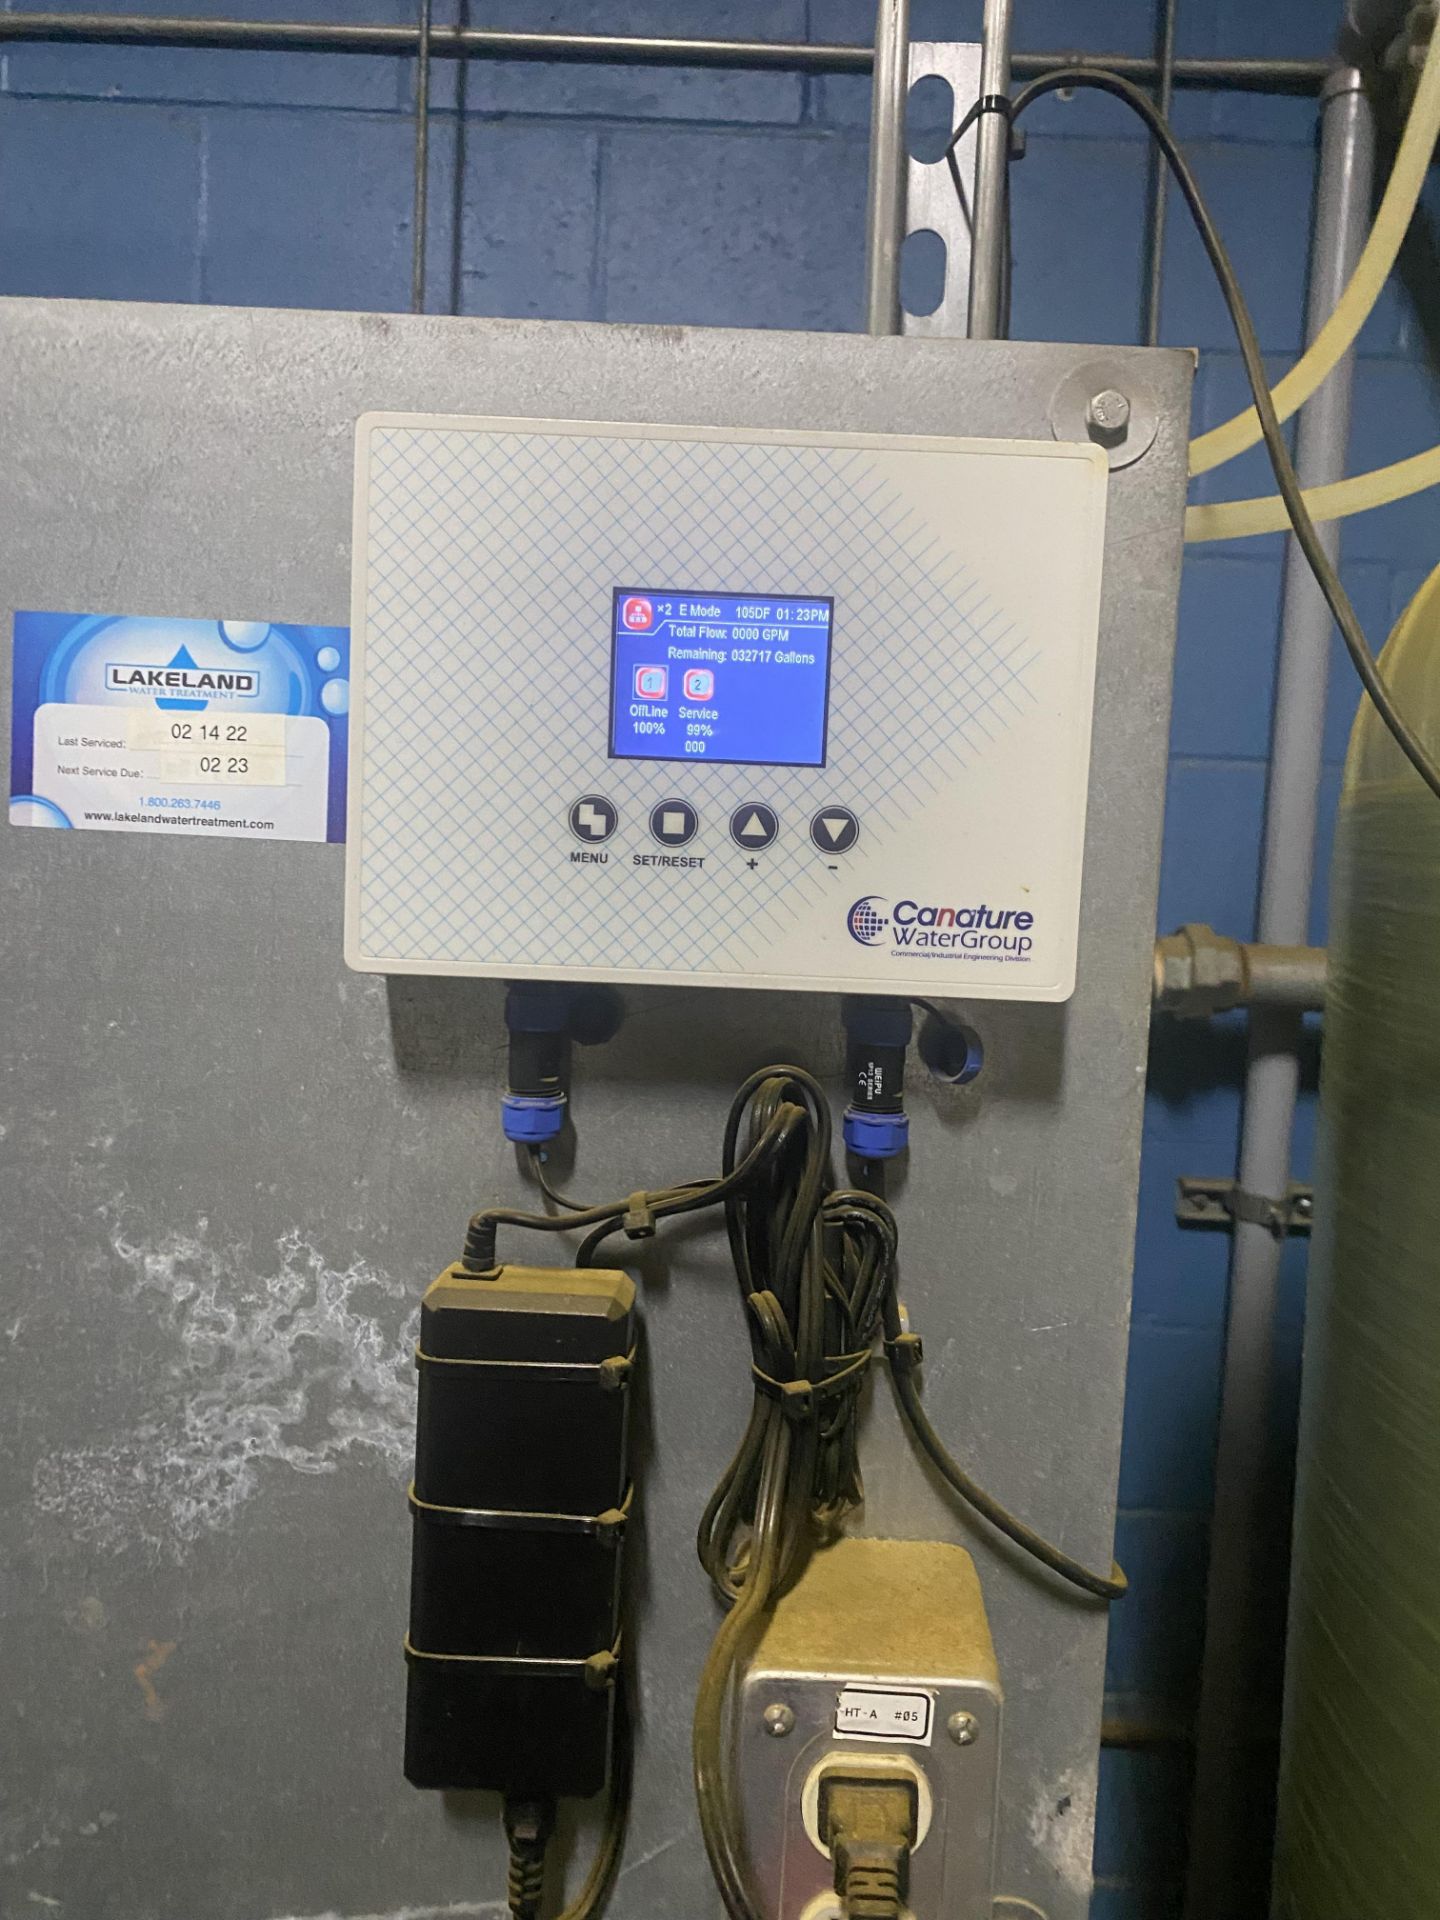 CANATURE WATER GROUP WATER SOFTENING SYSTEM INCLUDING CONTROL PANEL, CONTROL VALVES, TANKS, SALT